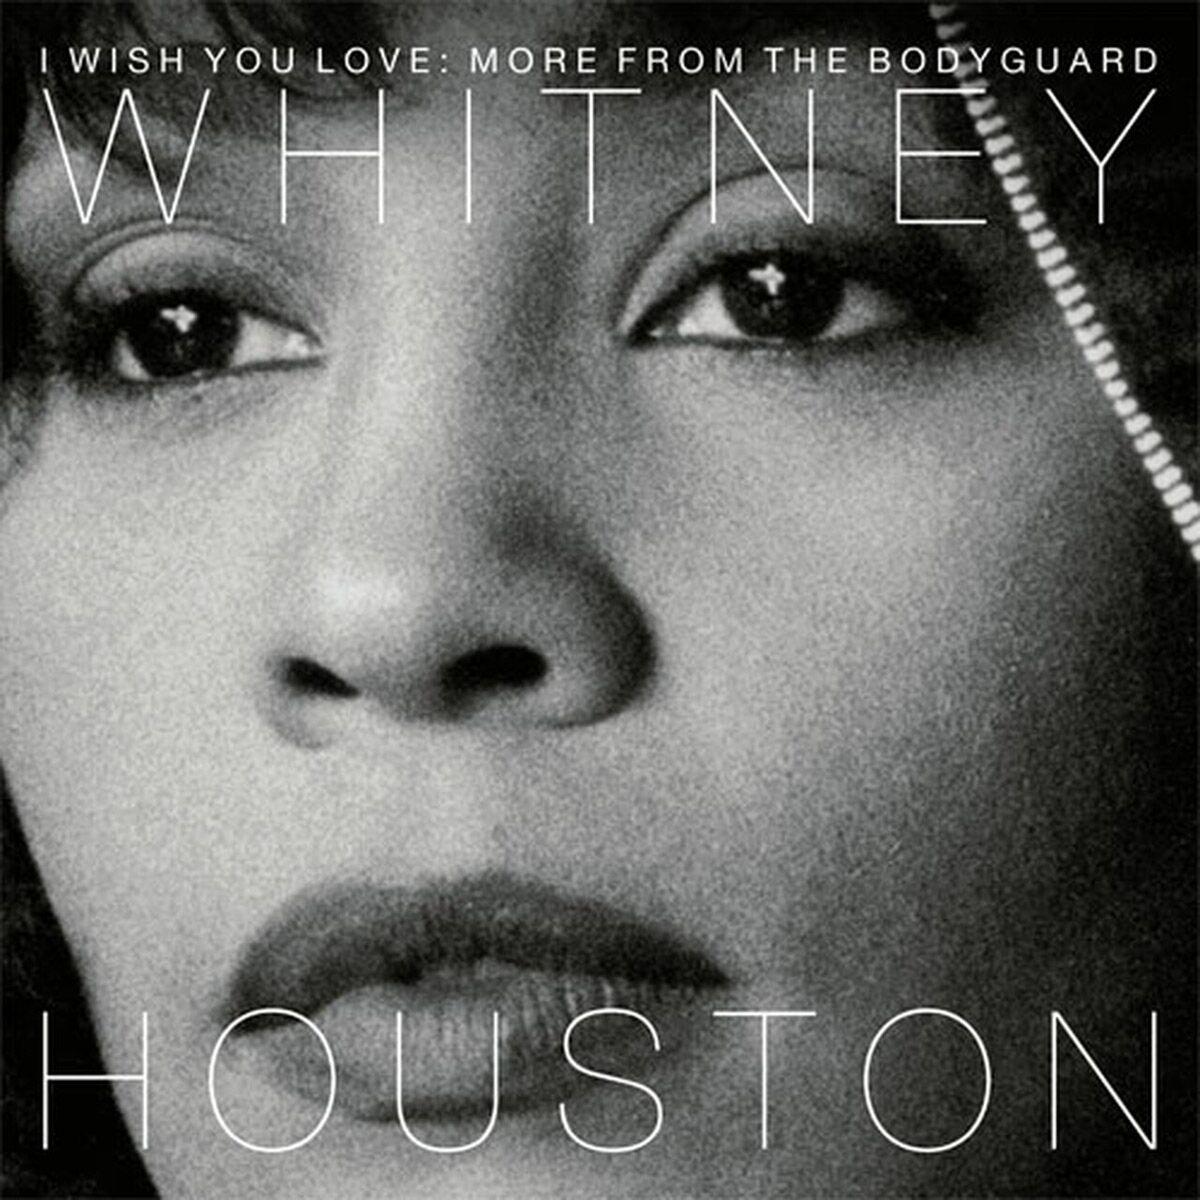 Houston Whitney I Wish You Love: More From The Bodyguard (Limited Edition, Numbered, Purple Vinyl) 2LP